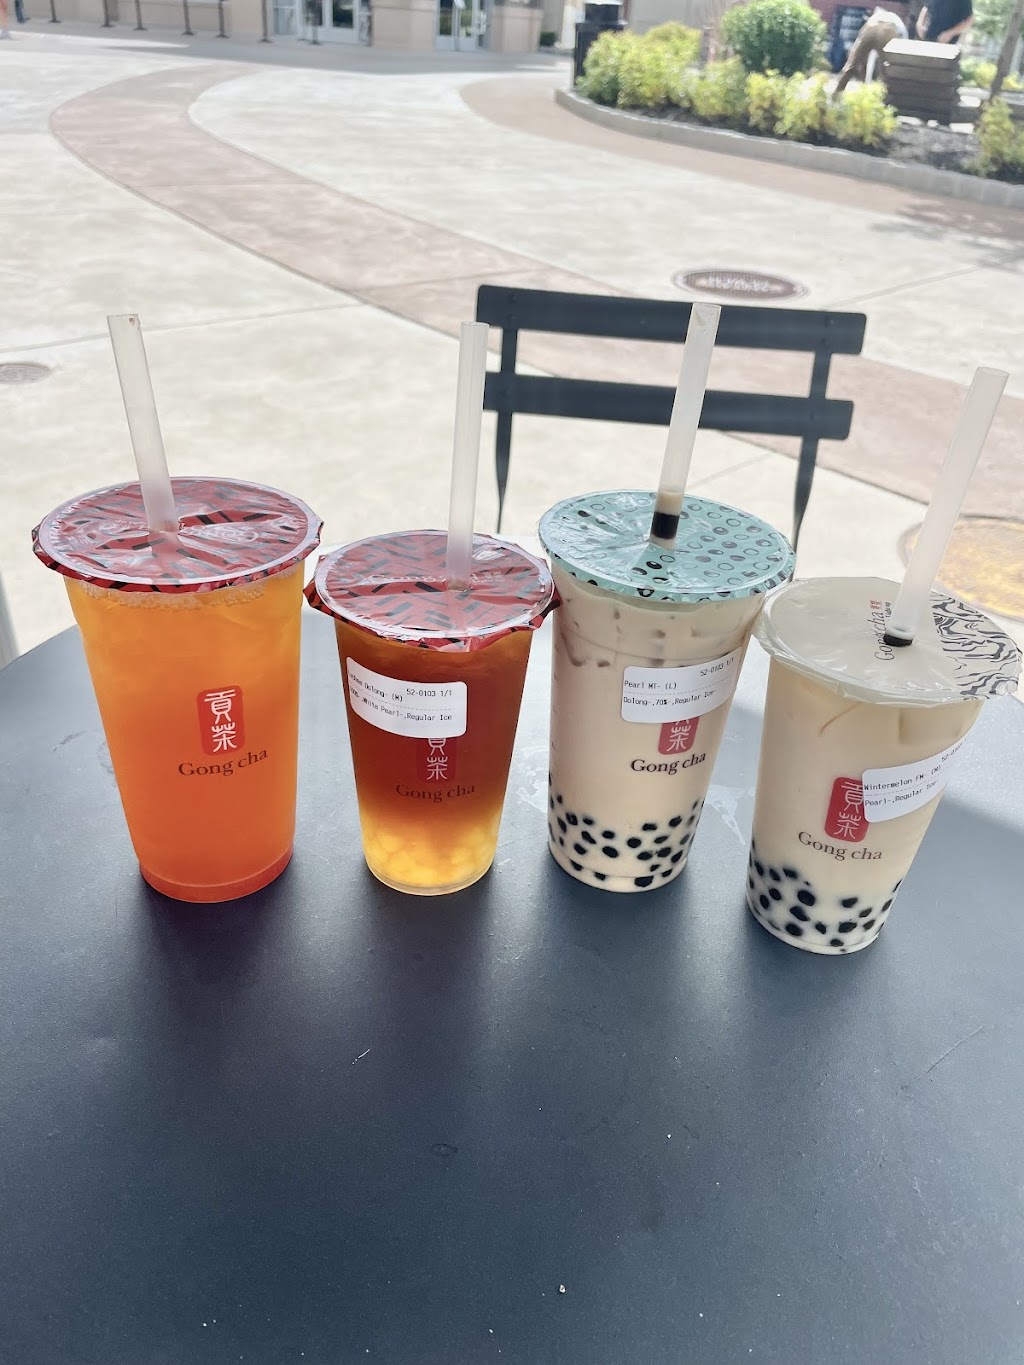 Gong Cha Woodbury Common Outlet | 714 Race Track Lane, Central Valley, NY 10917 | Phone: (845) 868-6898